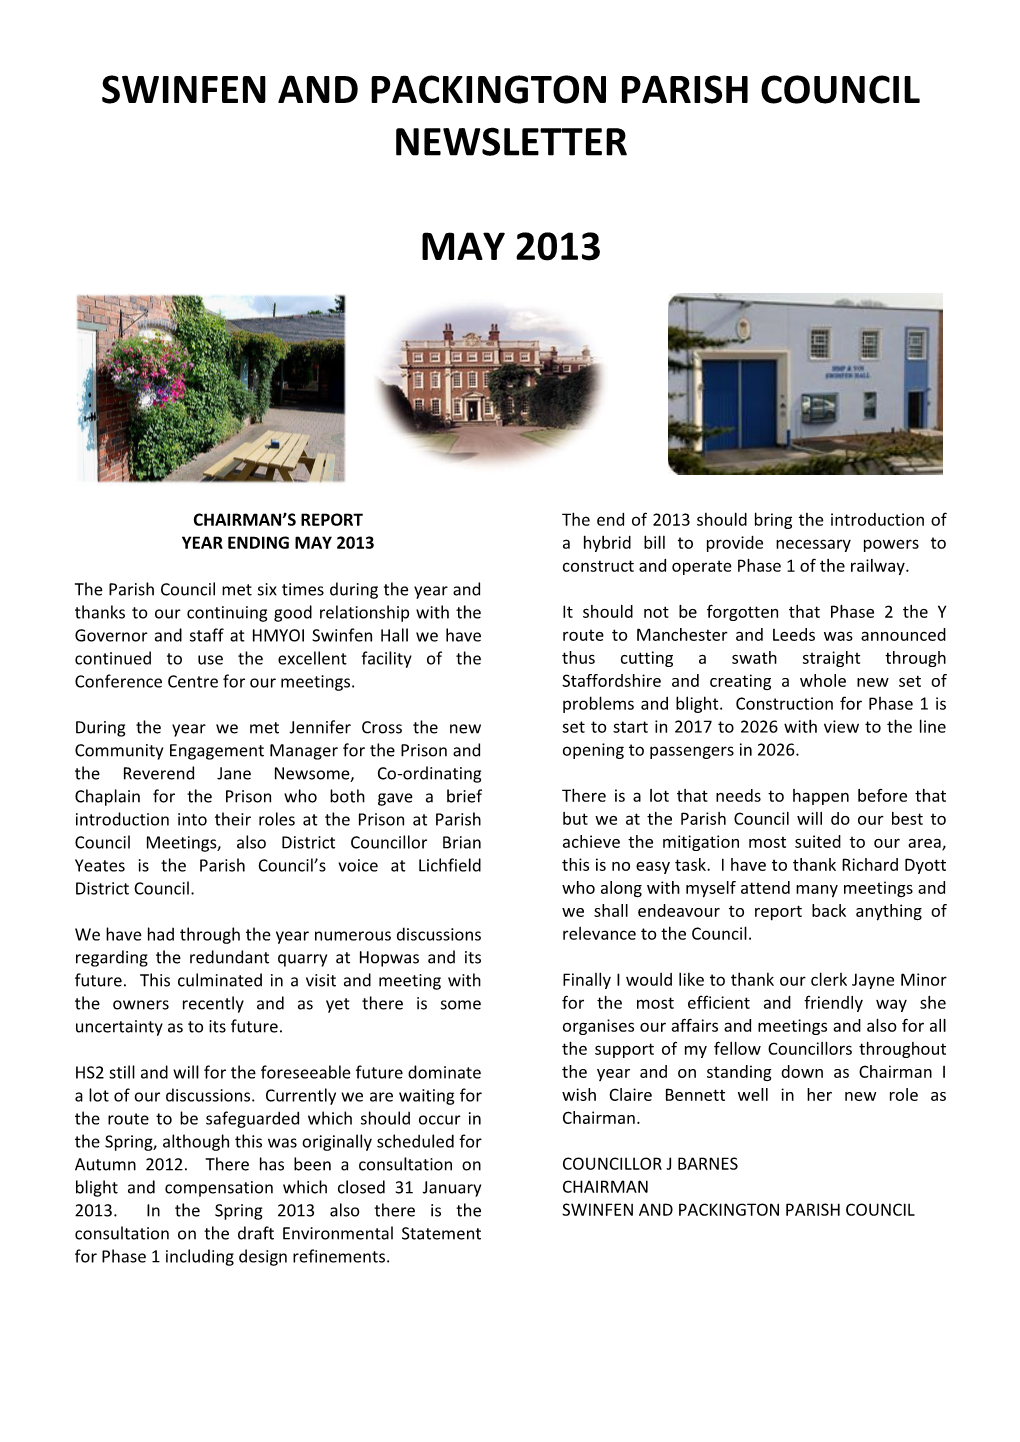 Swinfen and Packington Parish Council Newsletter May 2013